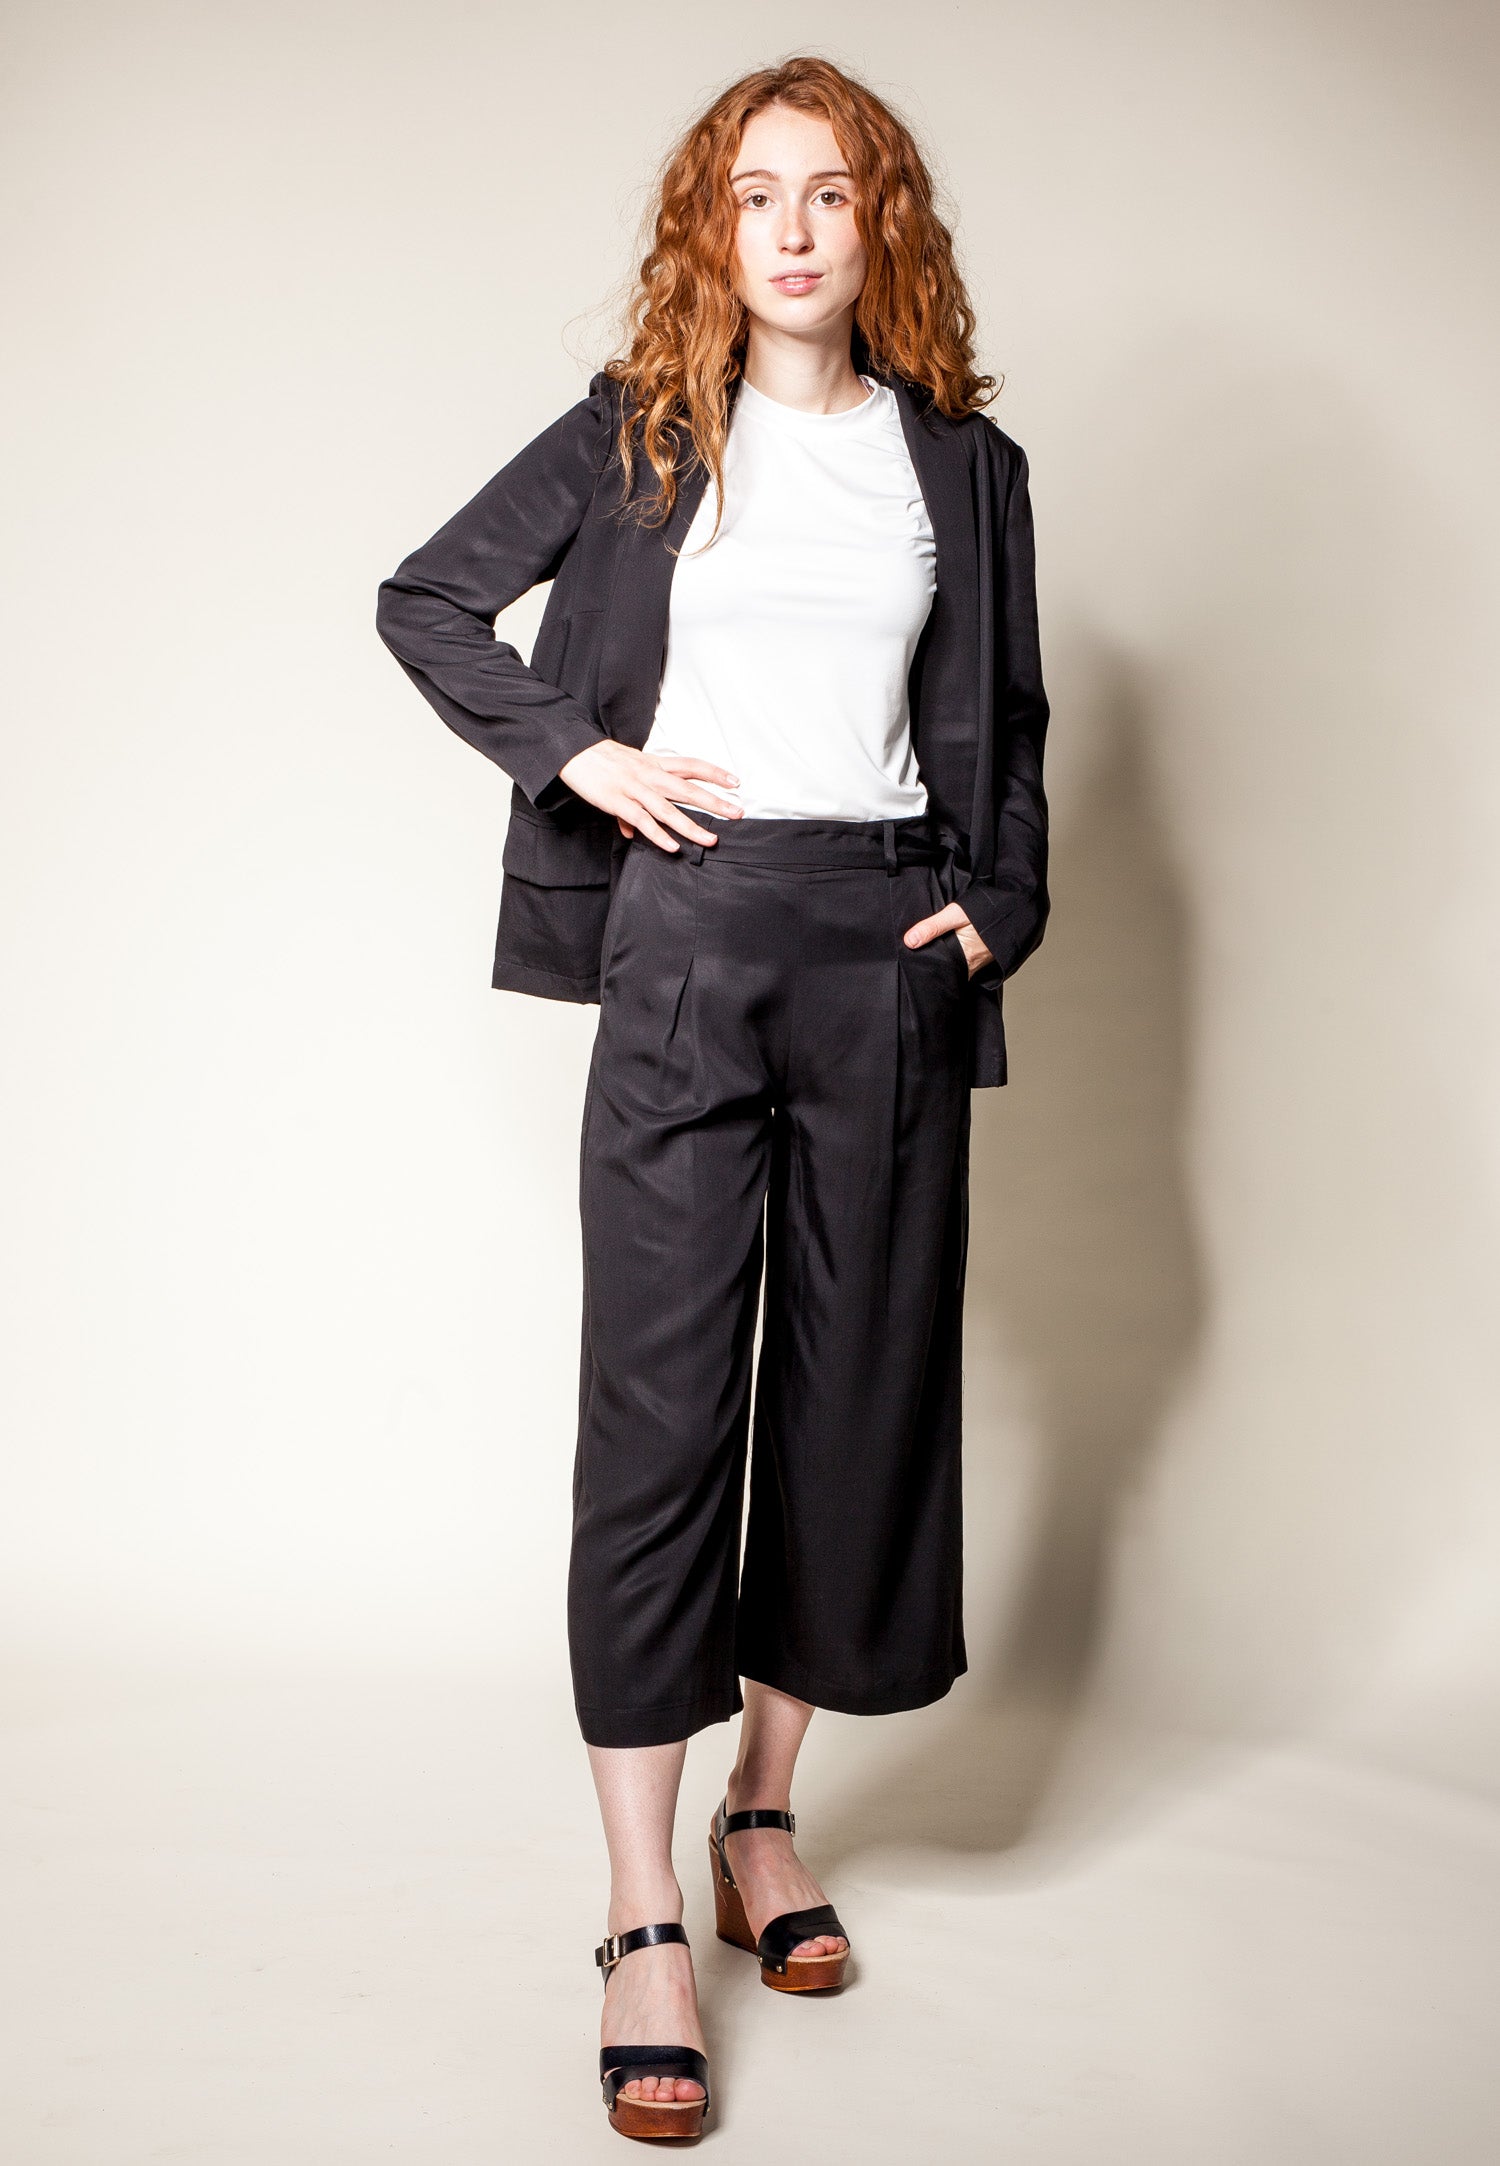 Night Walk Leather Pants Black - Pink Martini Collection